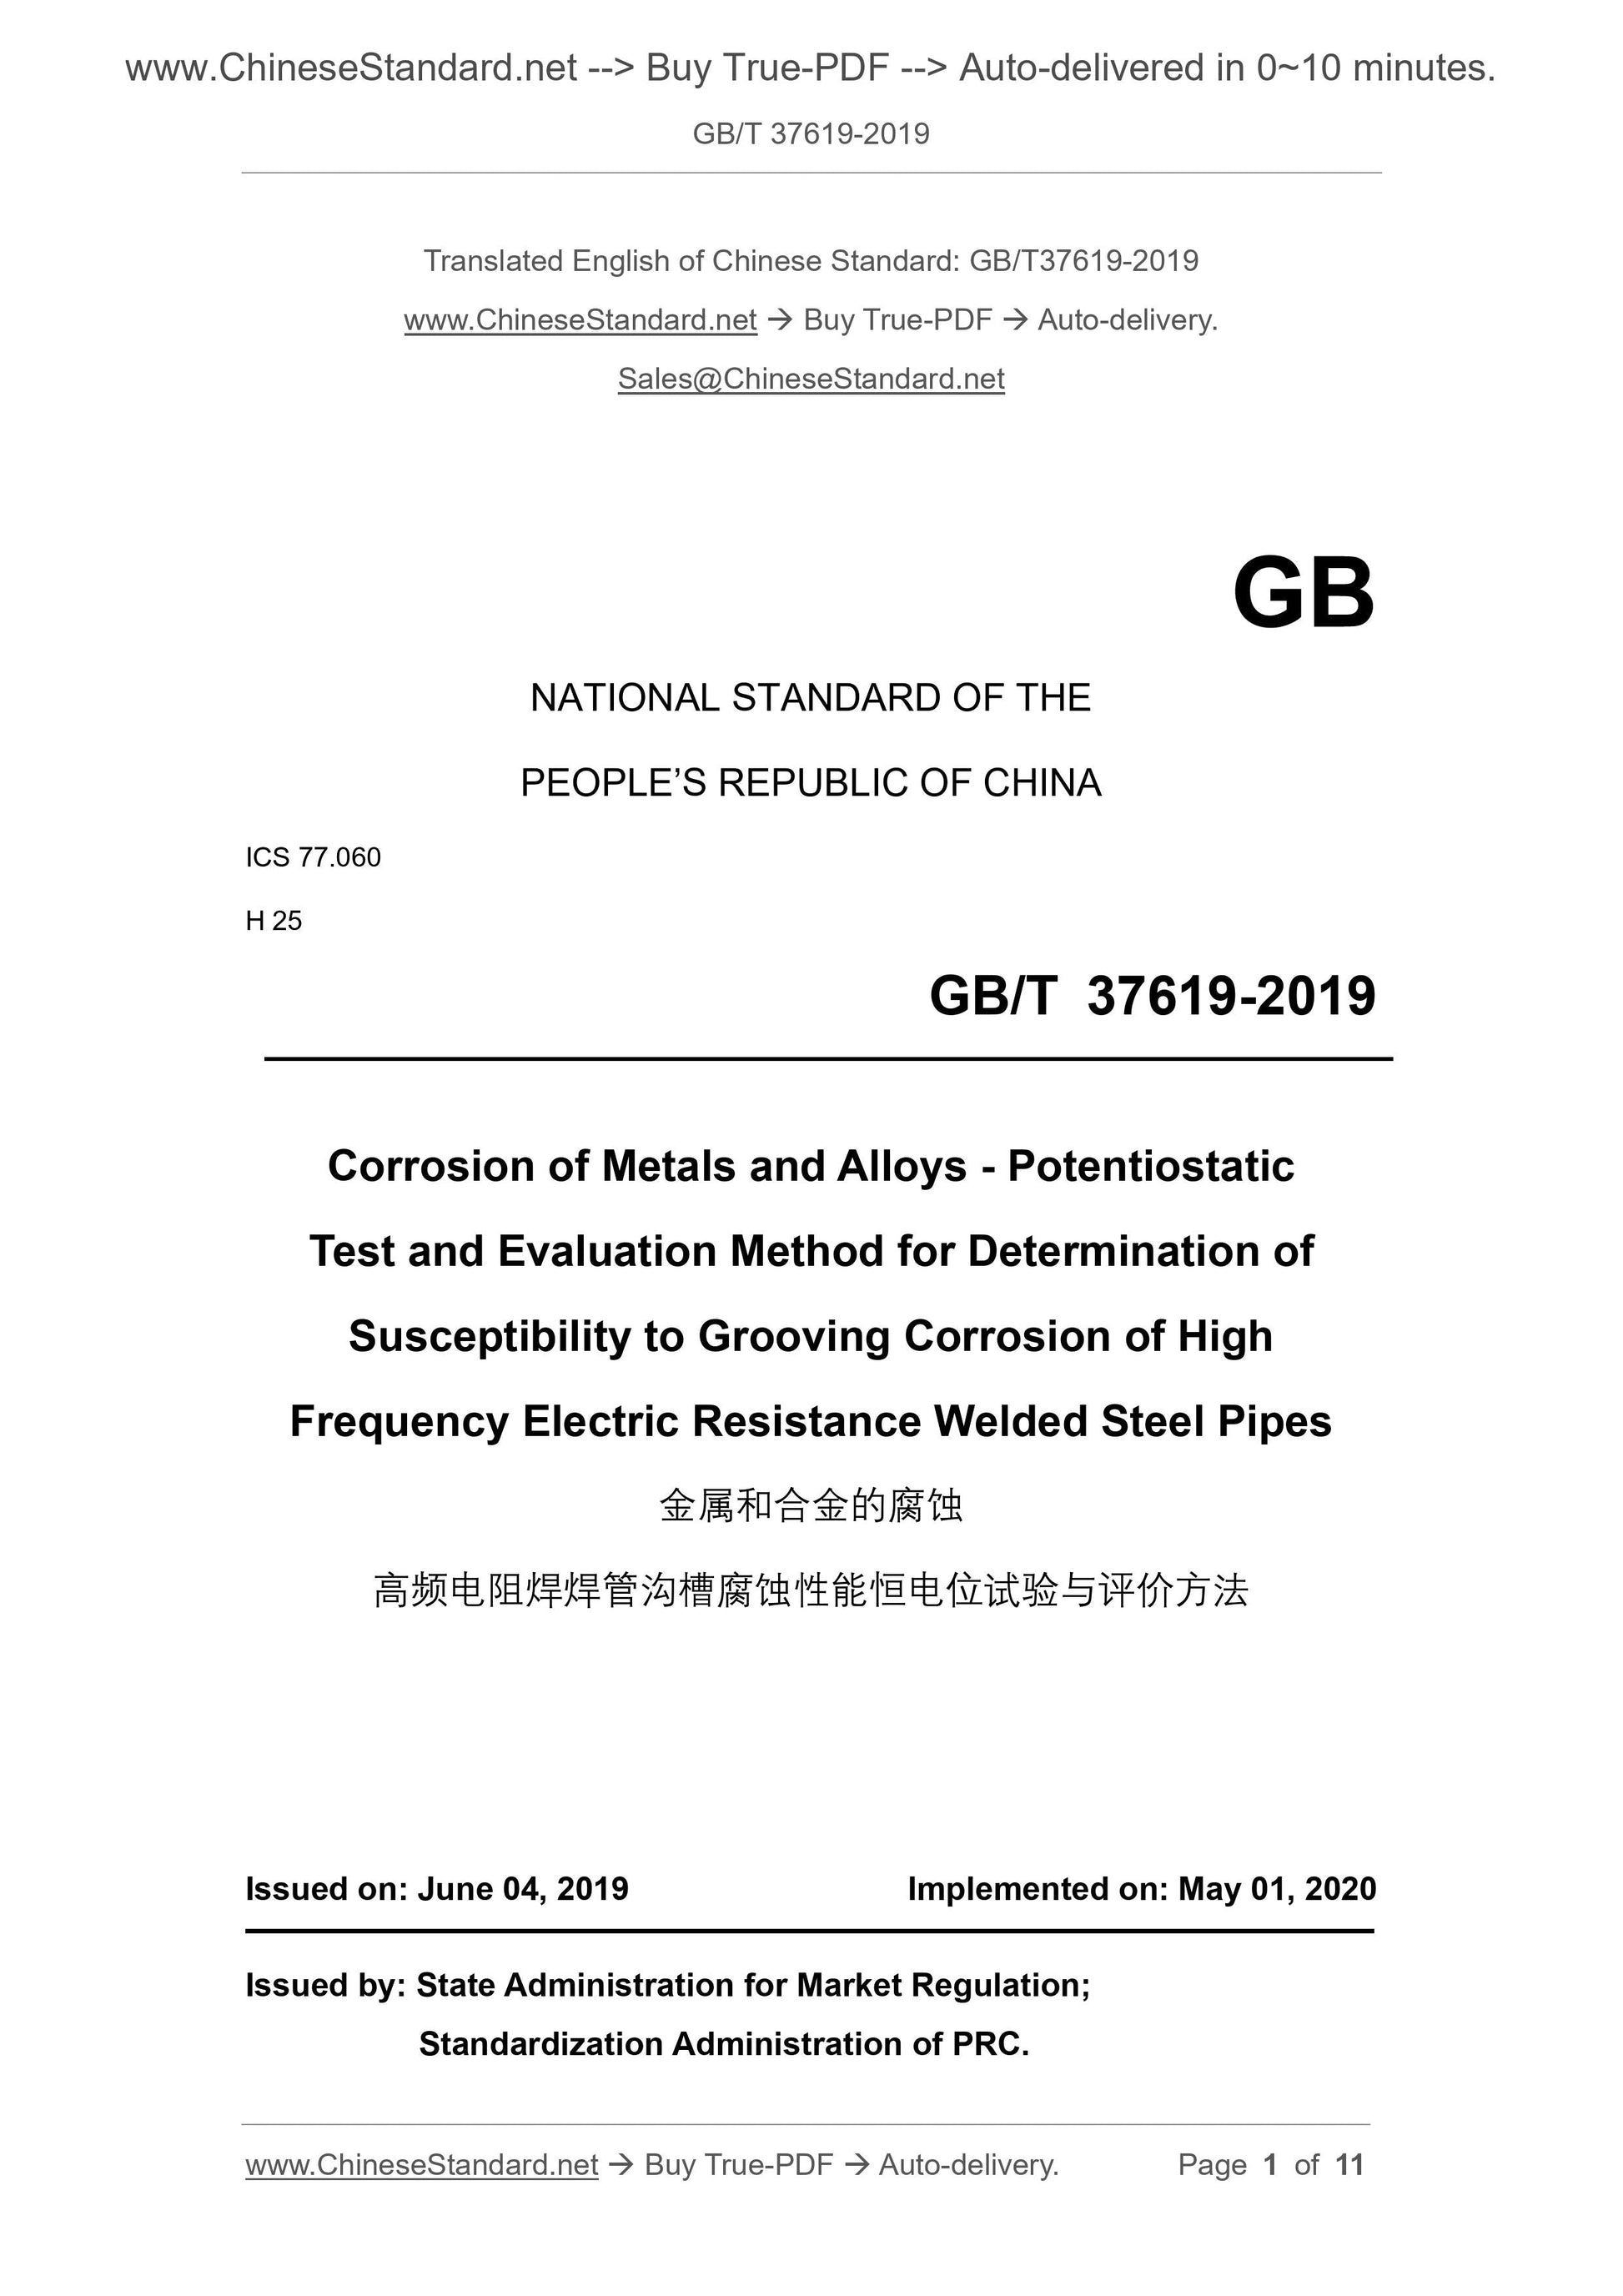 GB/T 37619-2019 Page 1